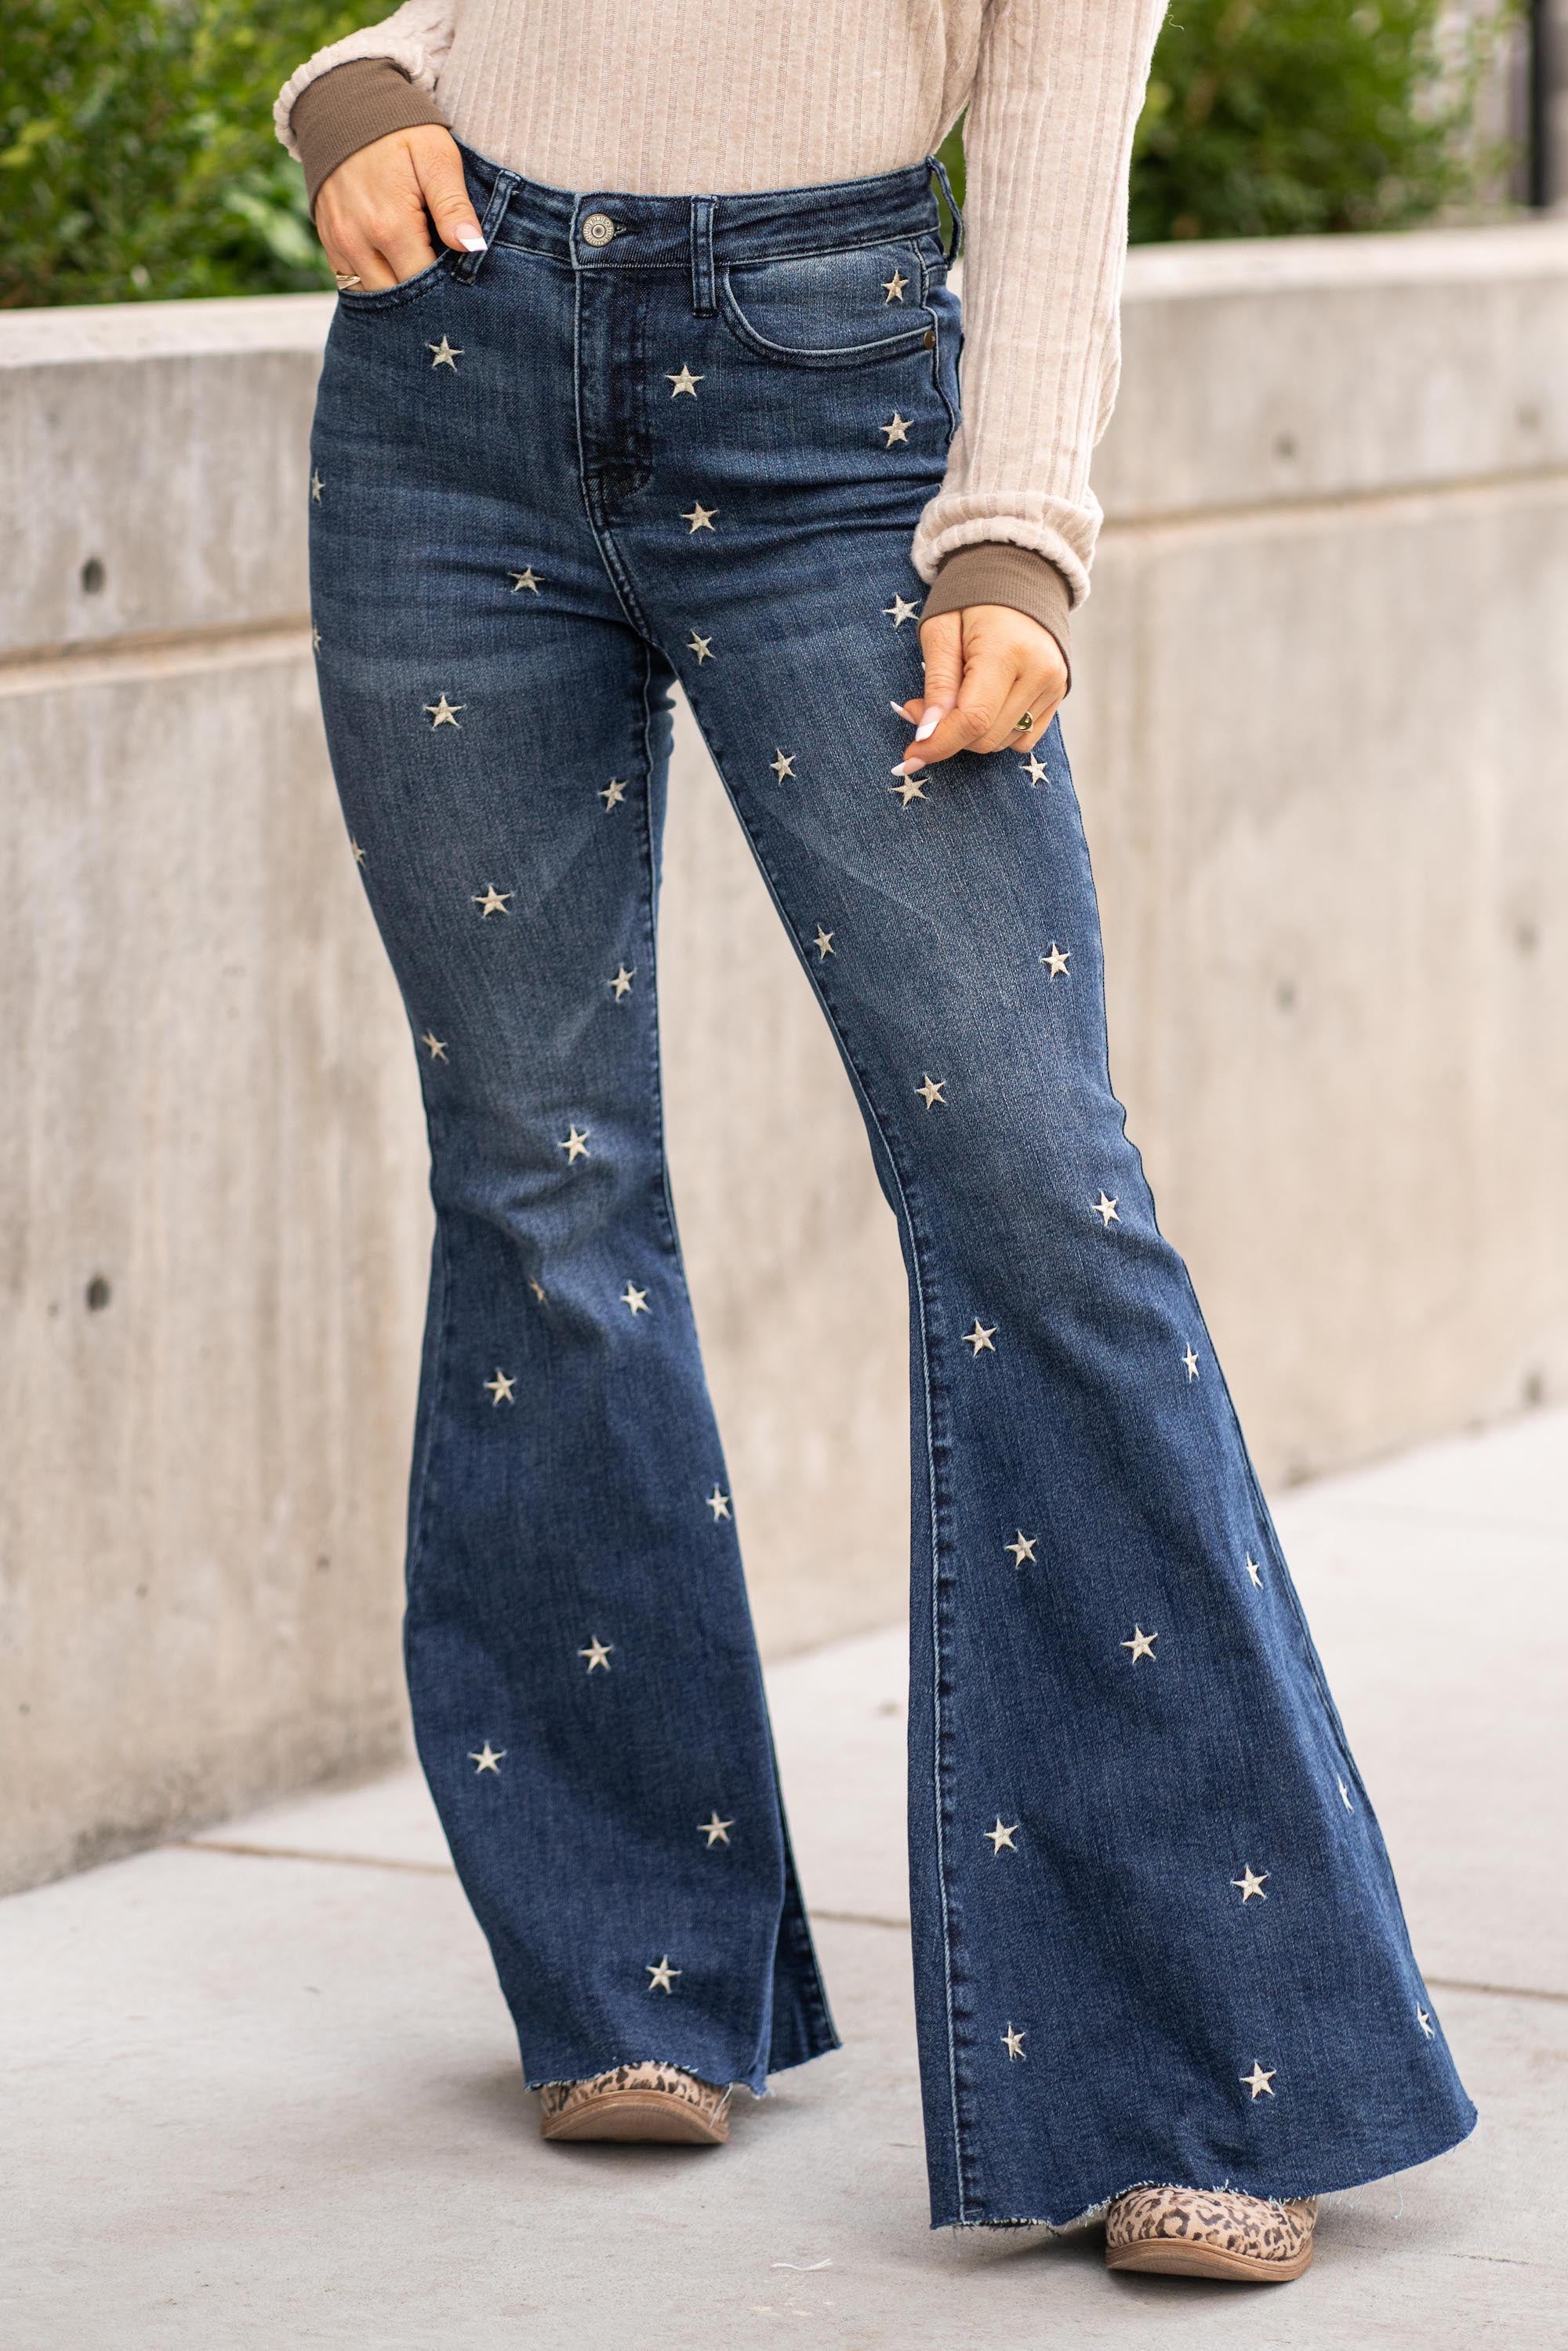 How To Style Bell Bottom Jeans: 10 Ways to Wear The Denim Style